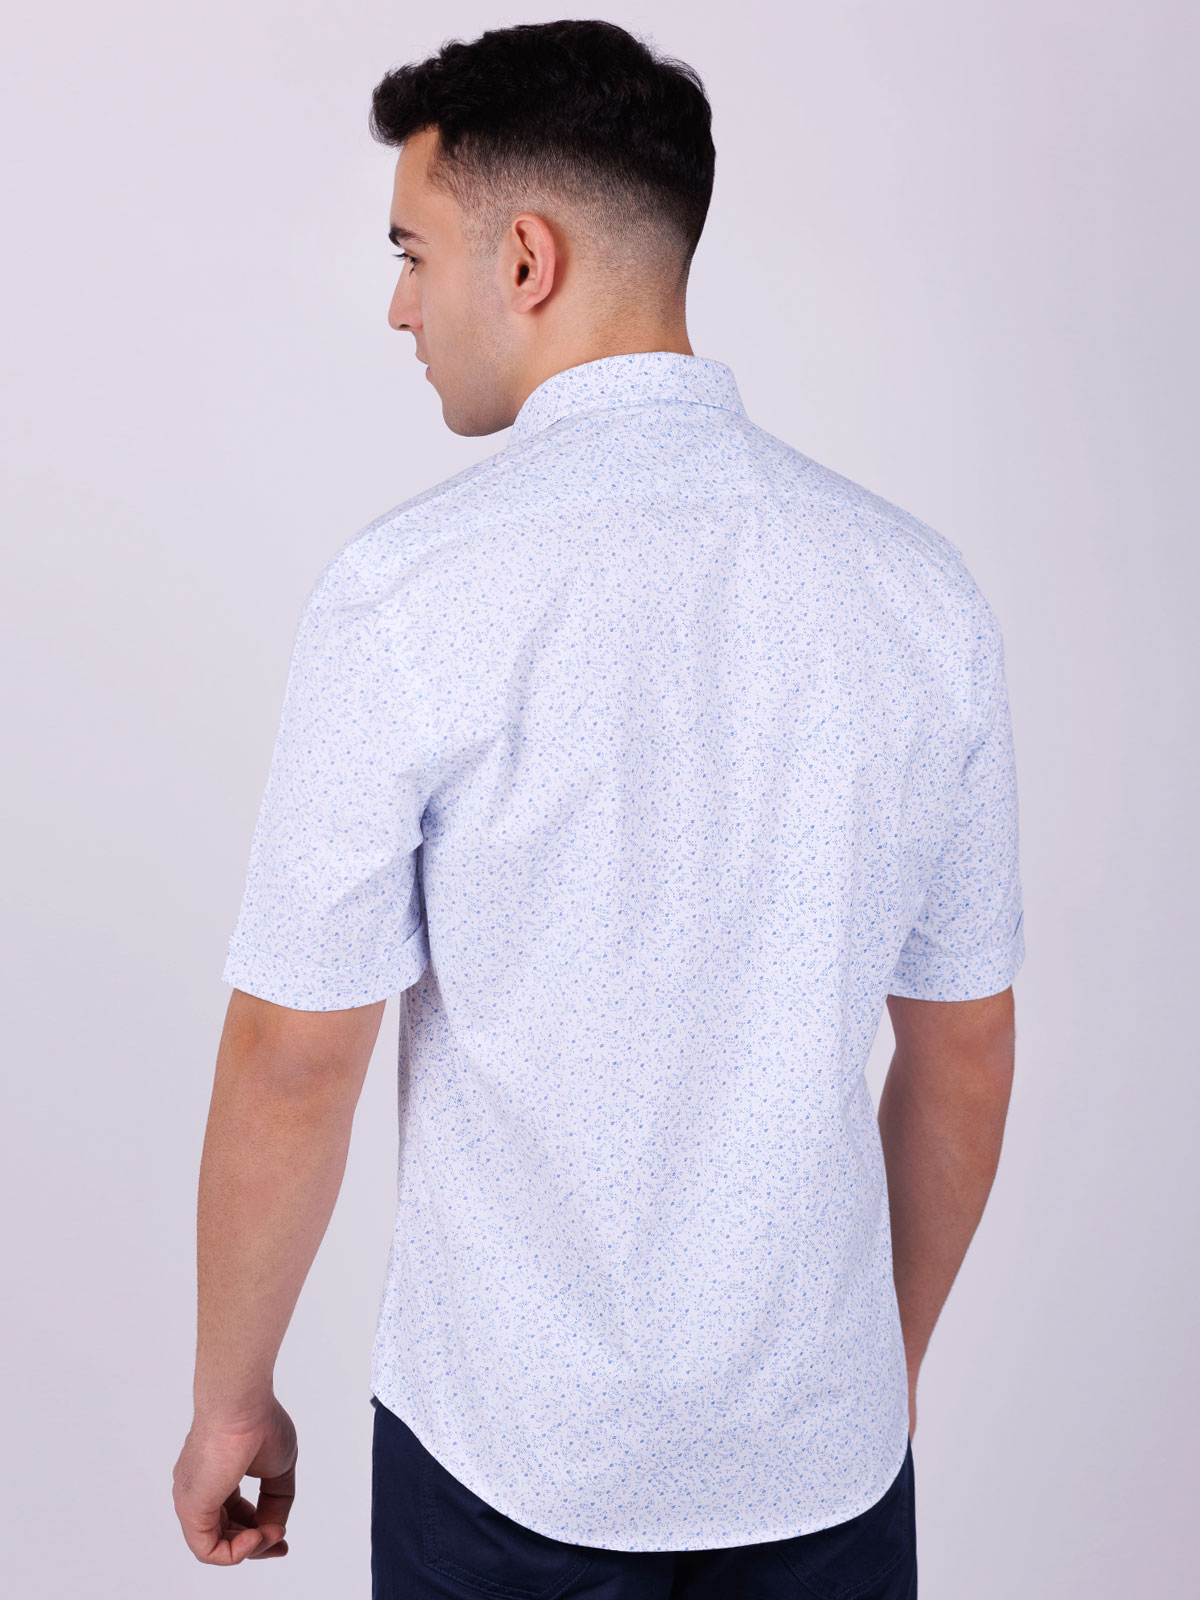 Shirt in white with small blue figures - 80231 € 38.81 img4